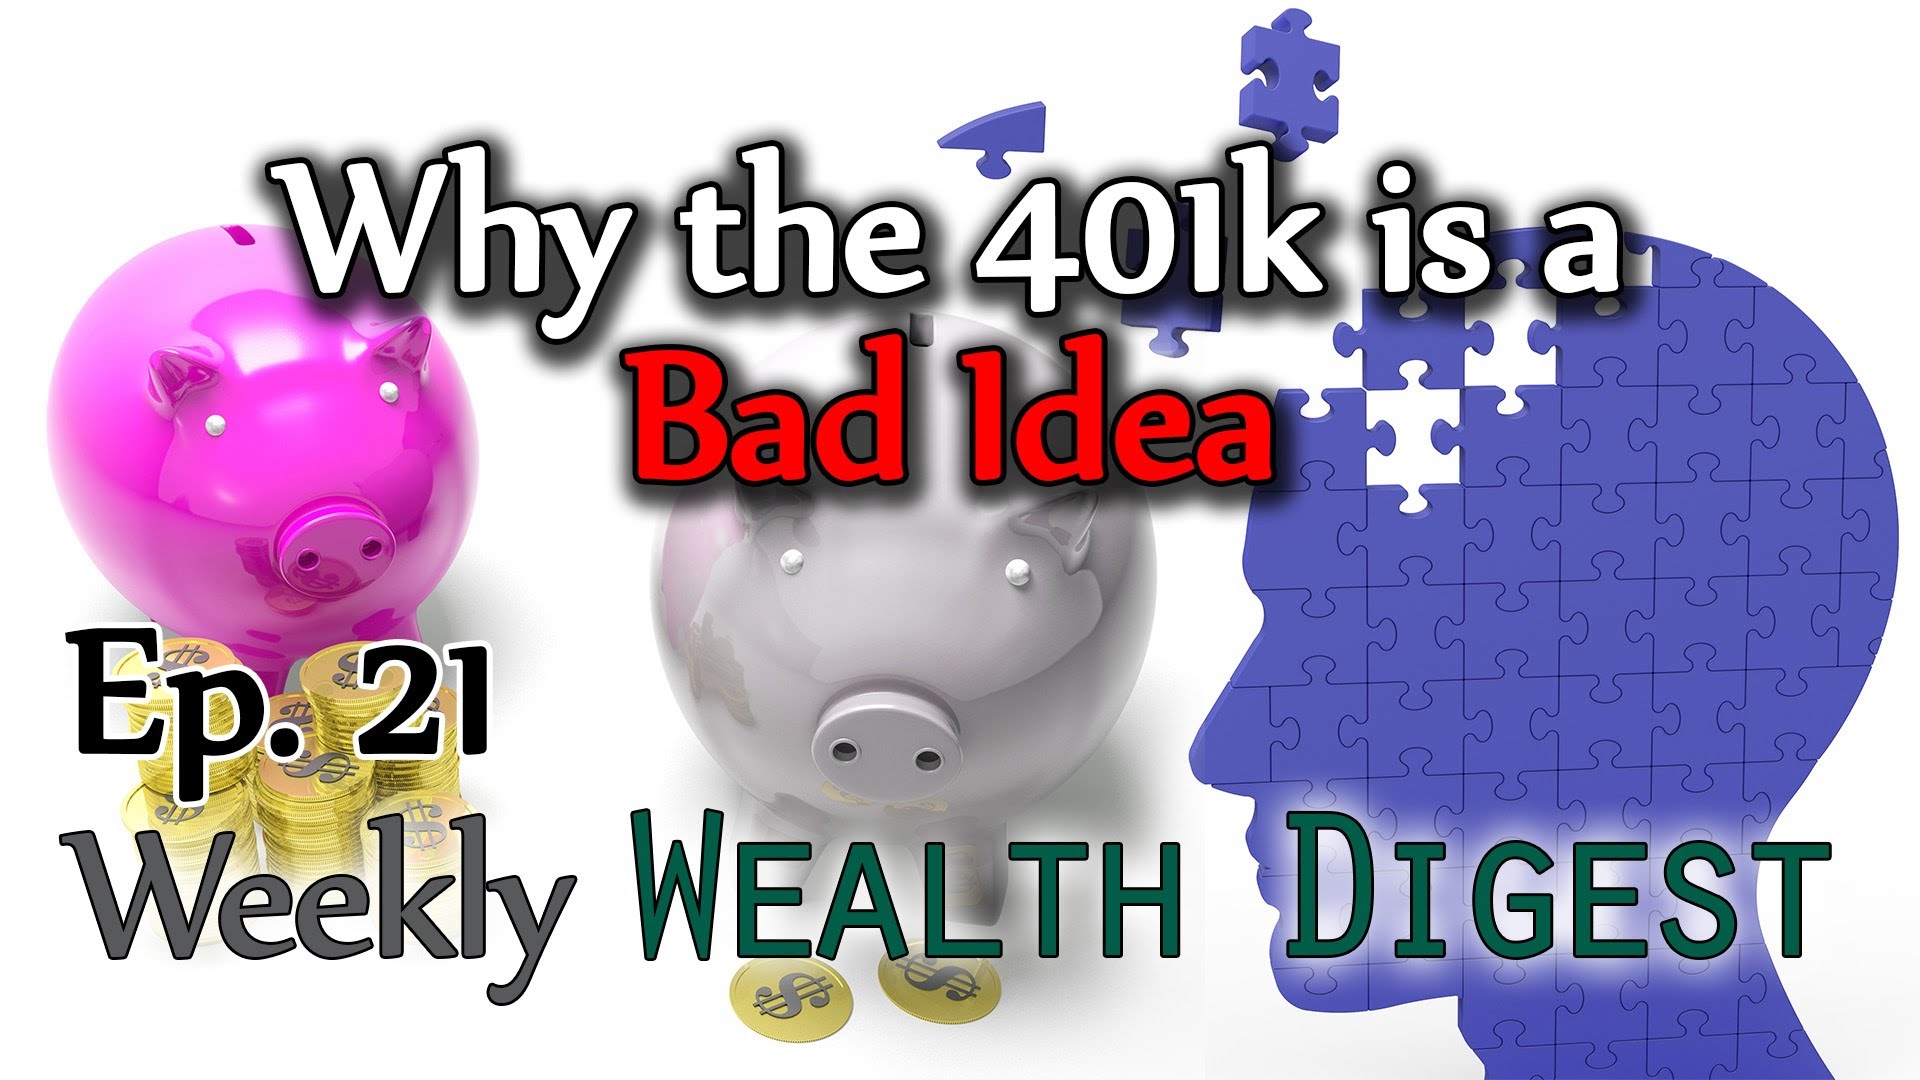 Why the 401k is a Bad Idea